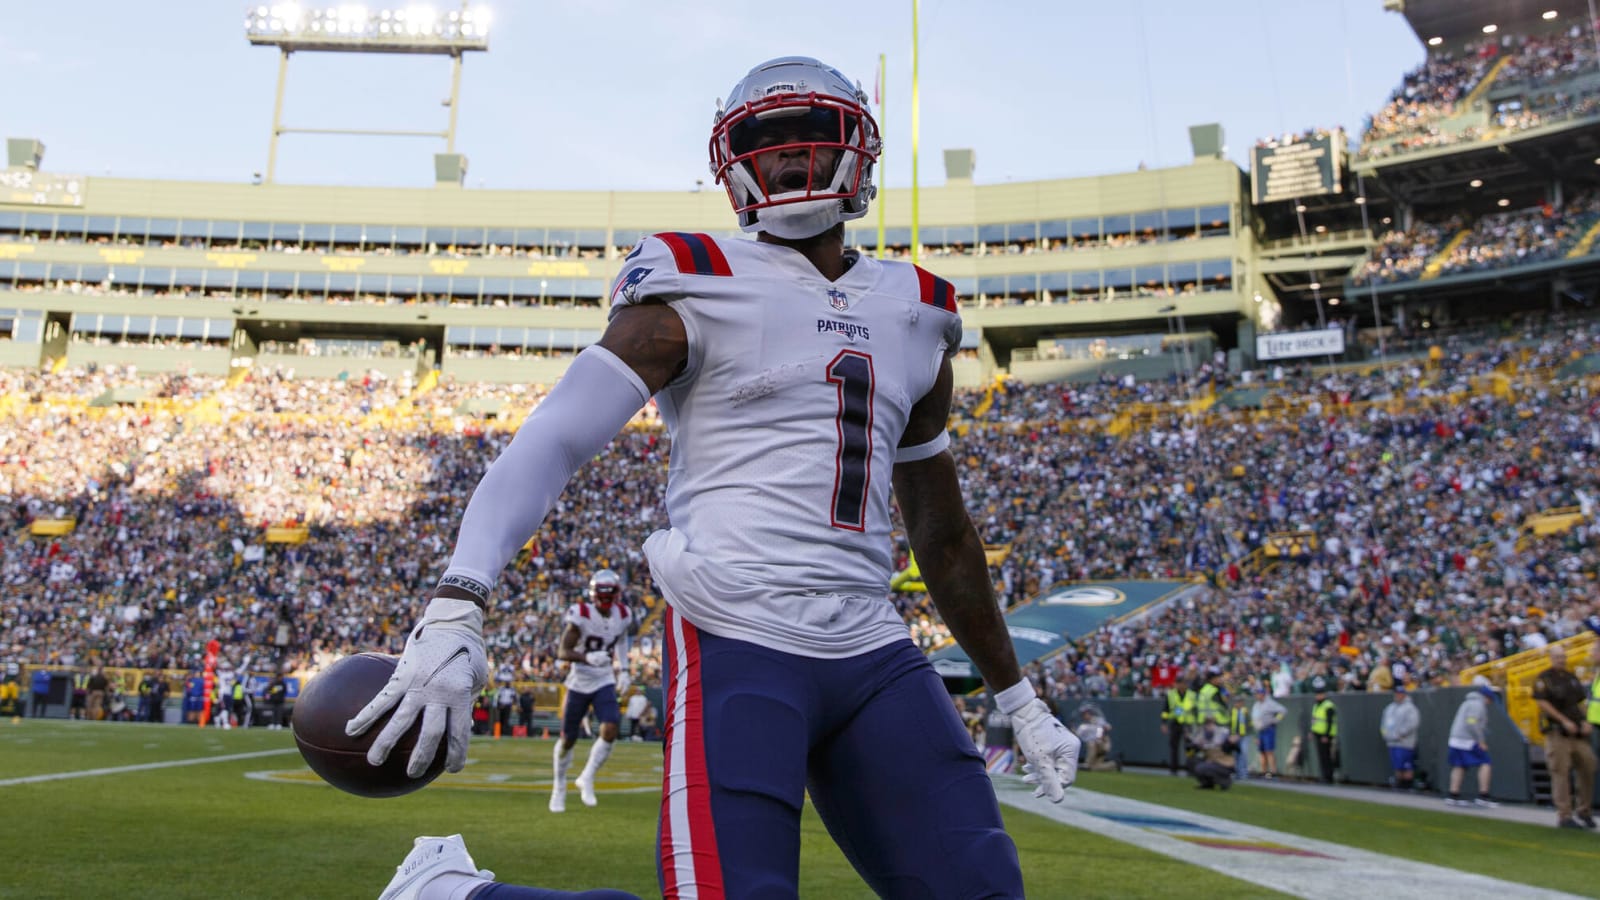 Report: Patriots sign big-bodied receiver to new deal